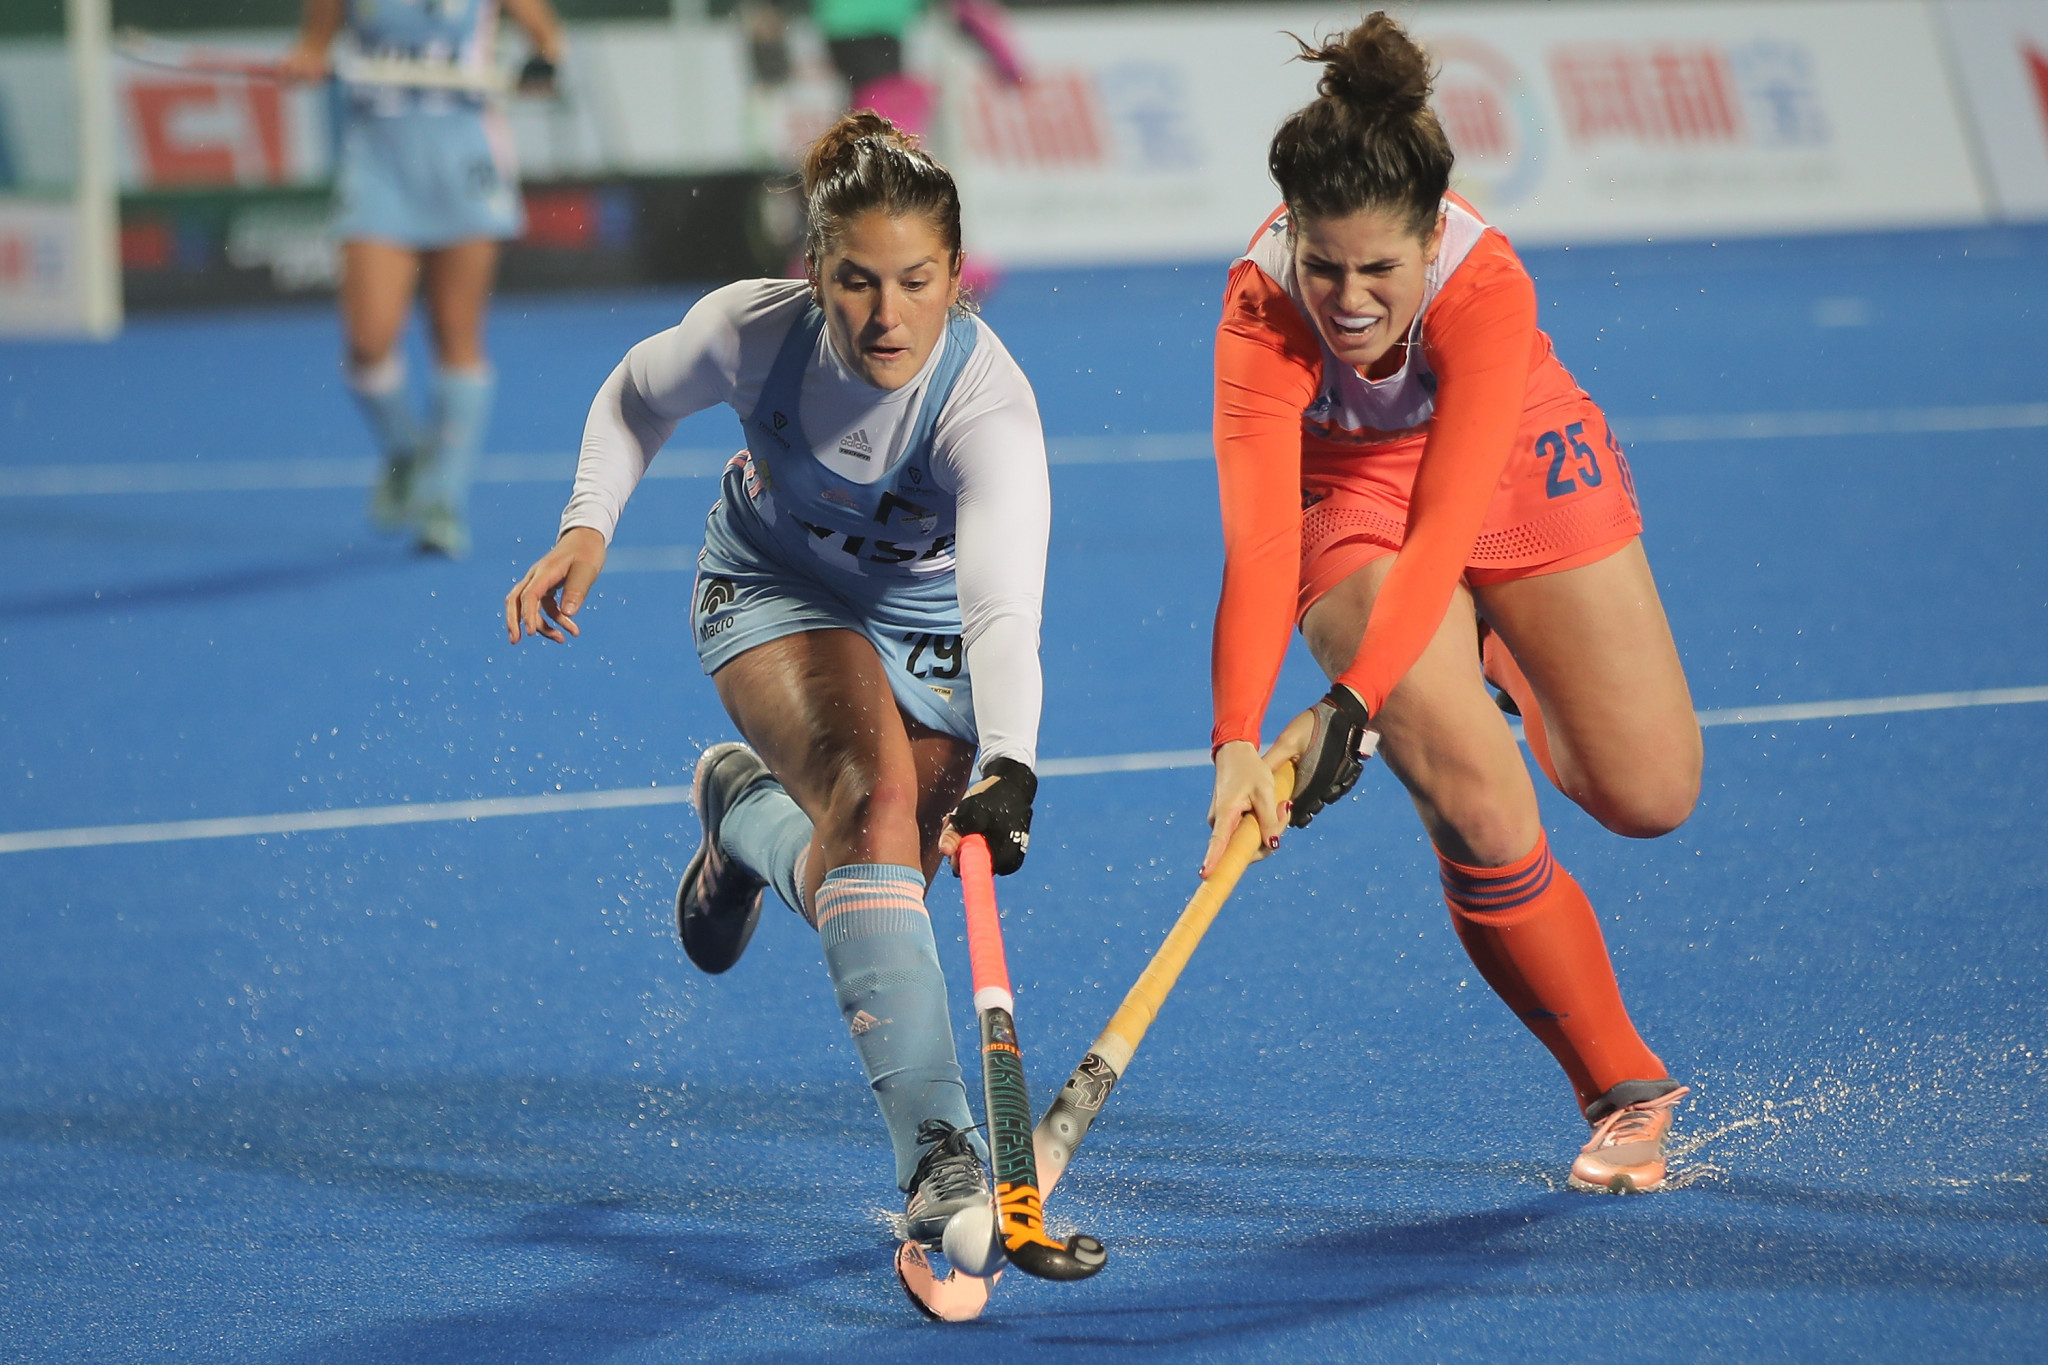 The Netherlands defeated Argentina at the FIH Women's Hockey Champions Trophy to get their second win of the competition ©Getty Images 